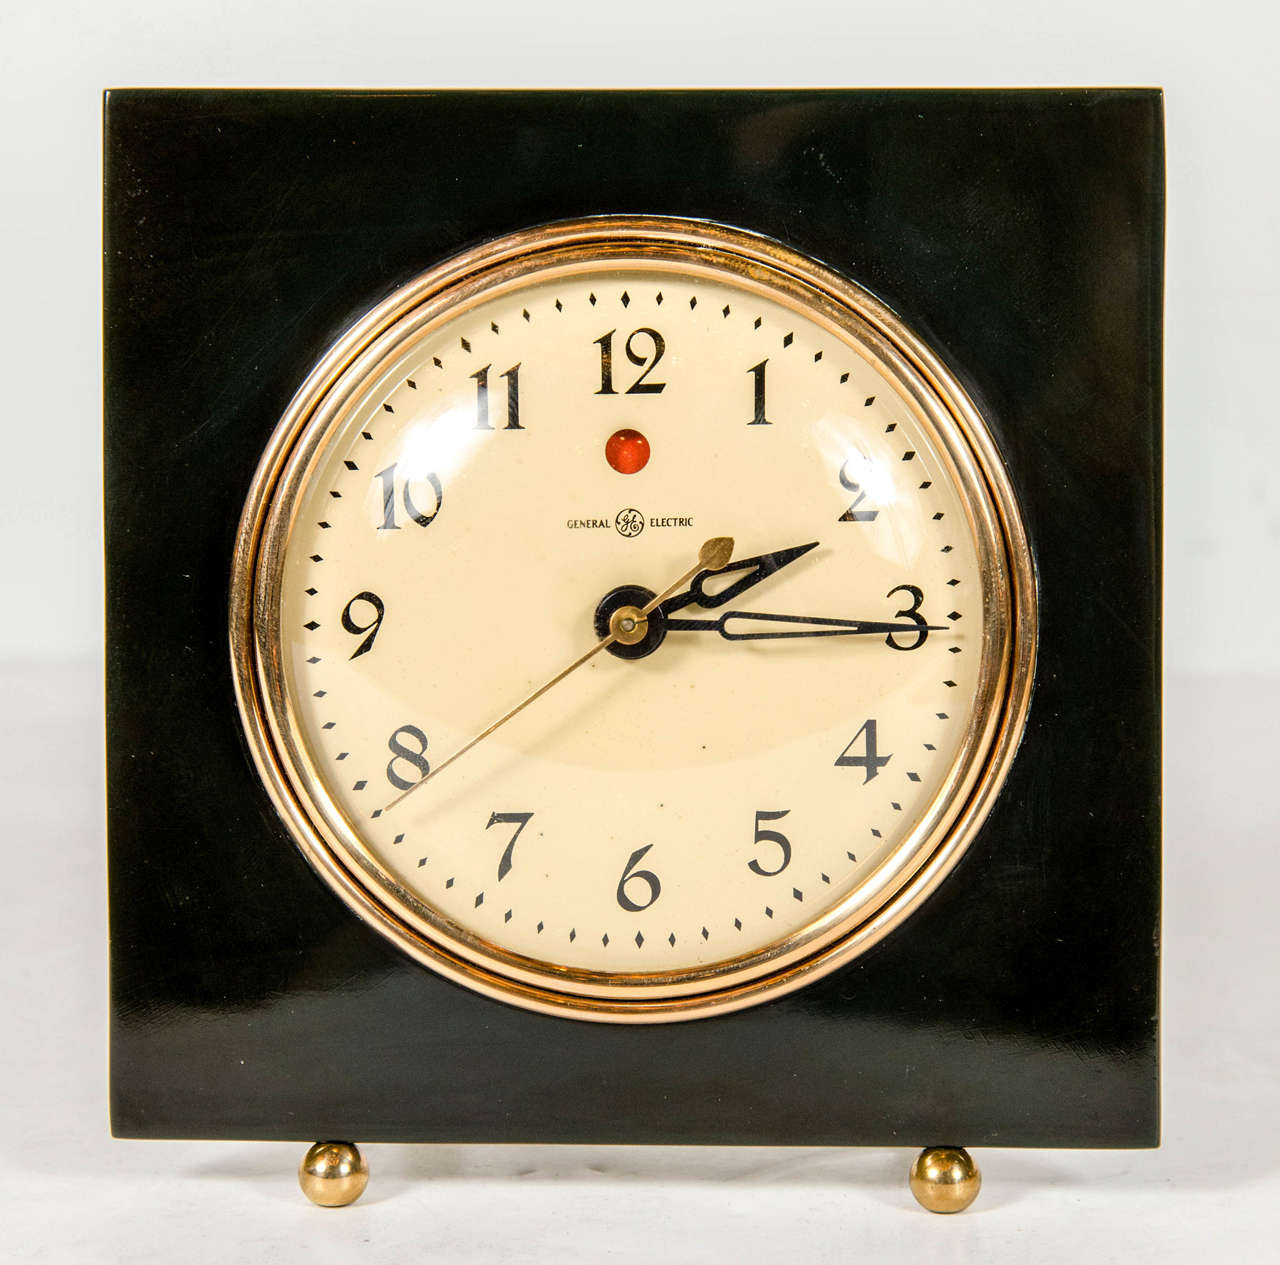 Art Deco Streamlined Vitrolite and brass clock by General Electric.  This streamlined Art Deco clock features a square surround made of Vitrolite that frames the clocks round brass outlined face and rests atop two stylized geometric spherical feet